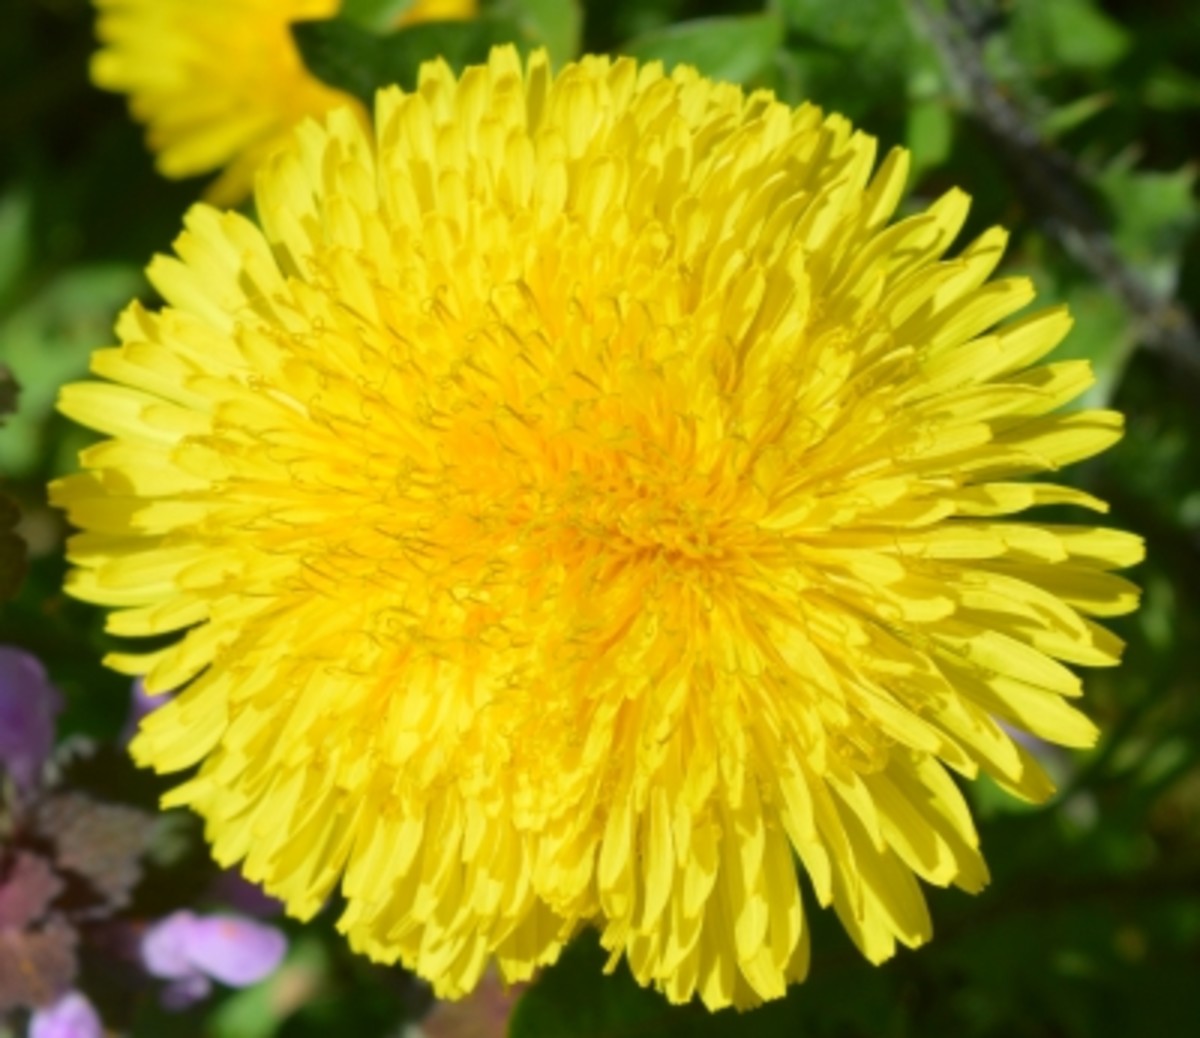 Dandelion is not just a weed anymore. Read about the health benefits of this flower and other herbs and plants below!